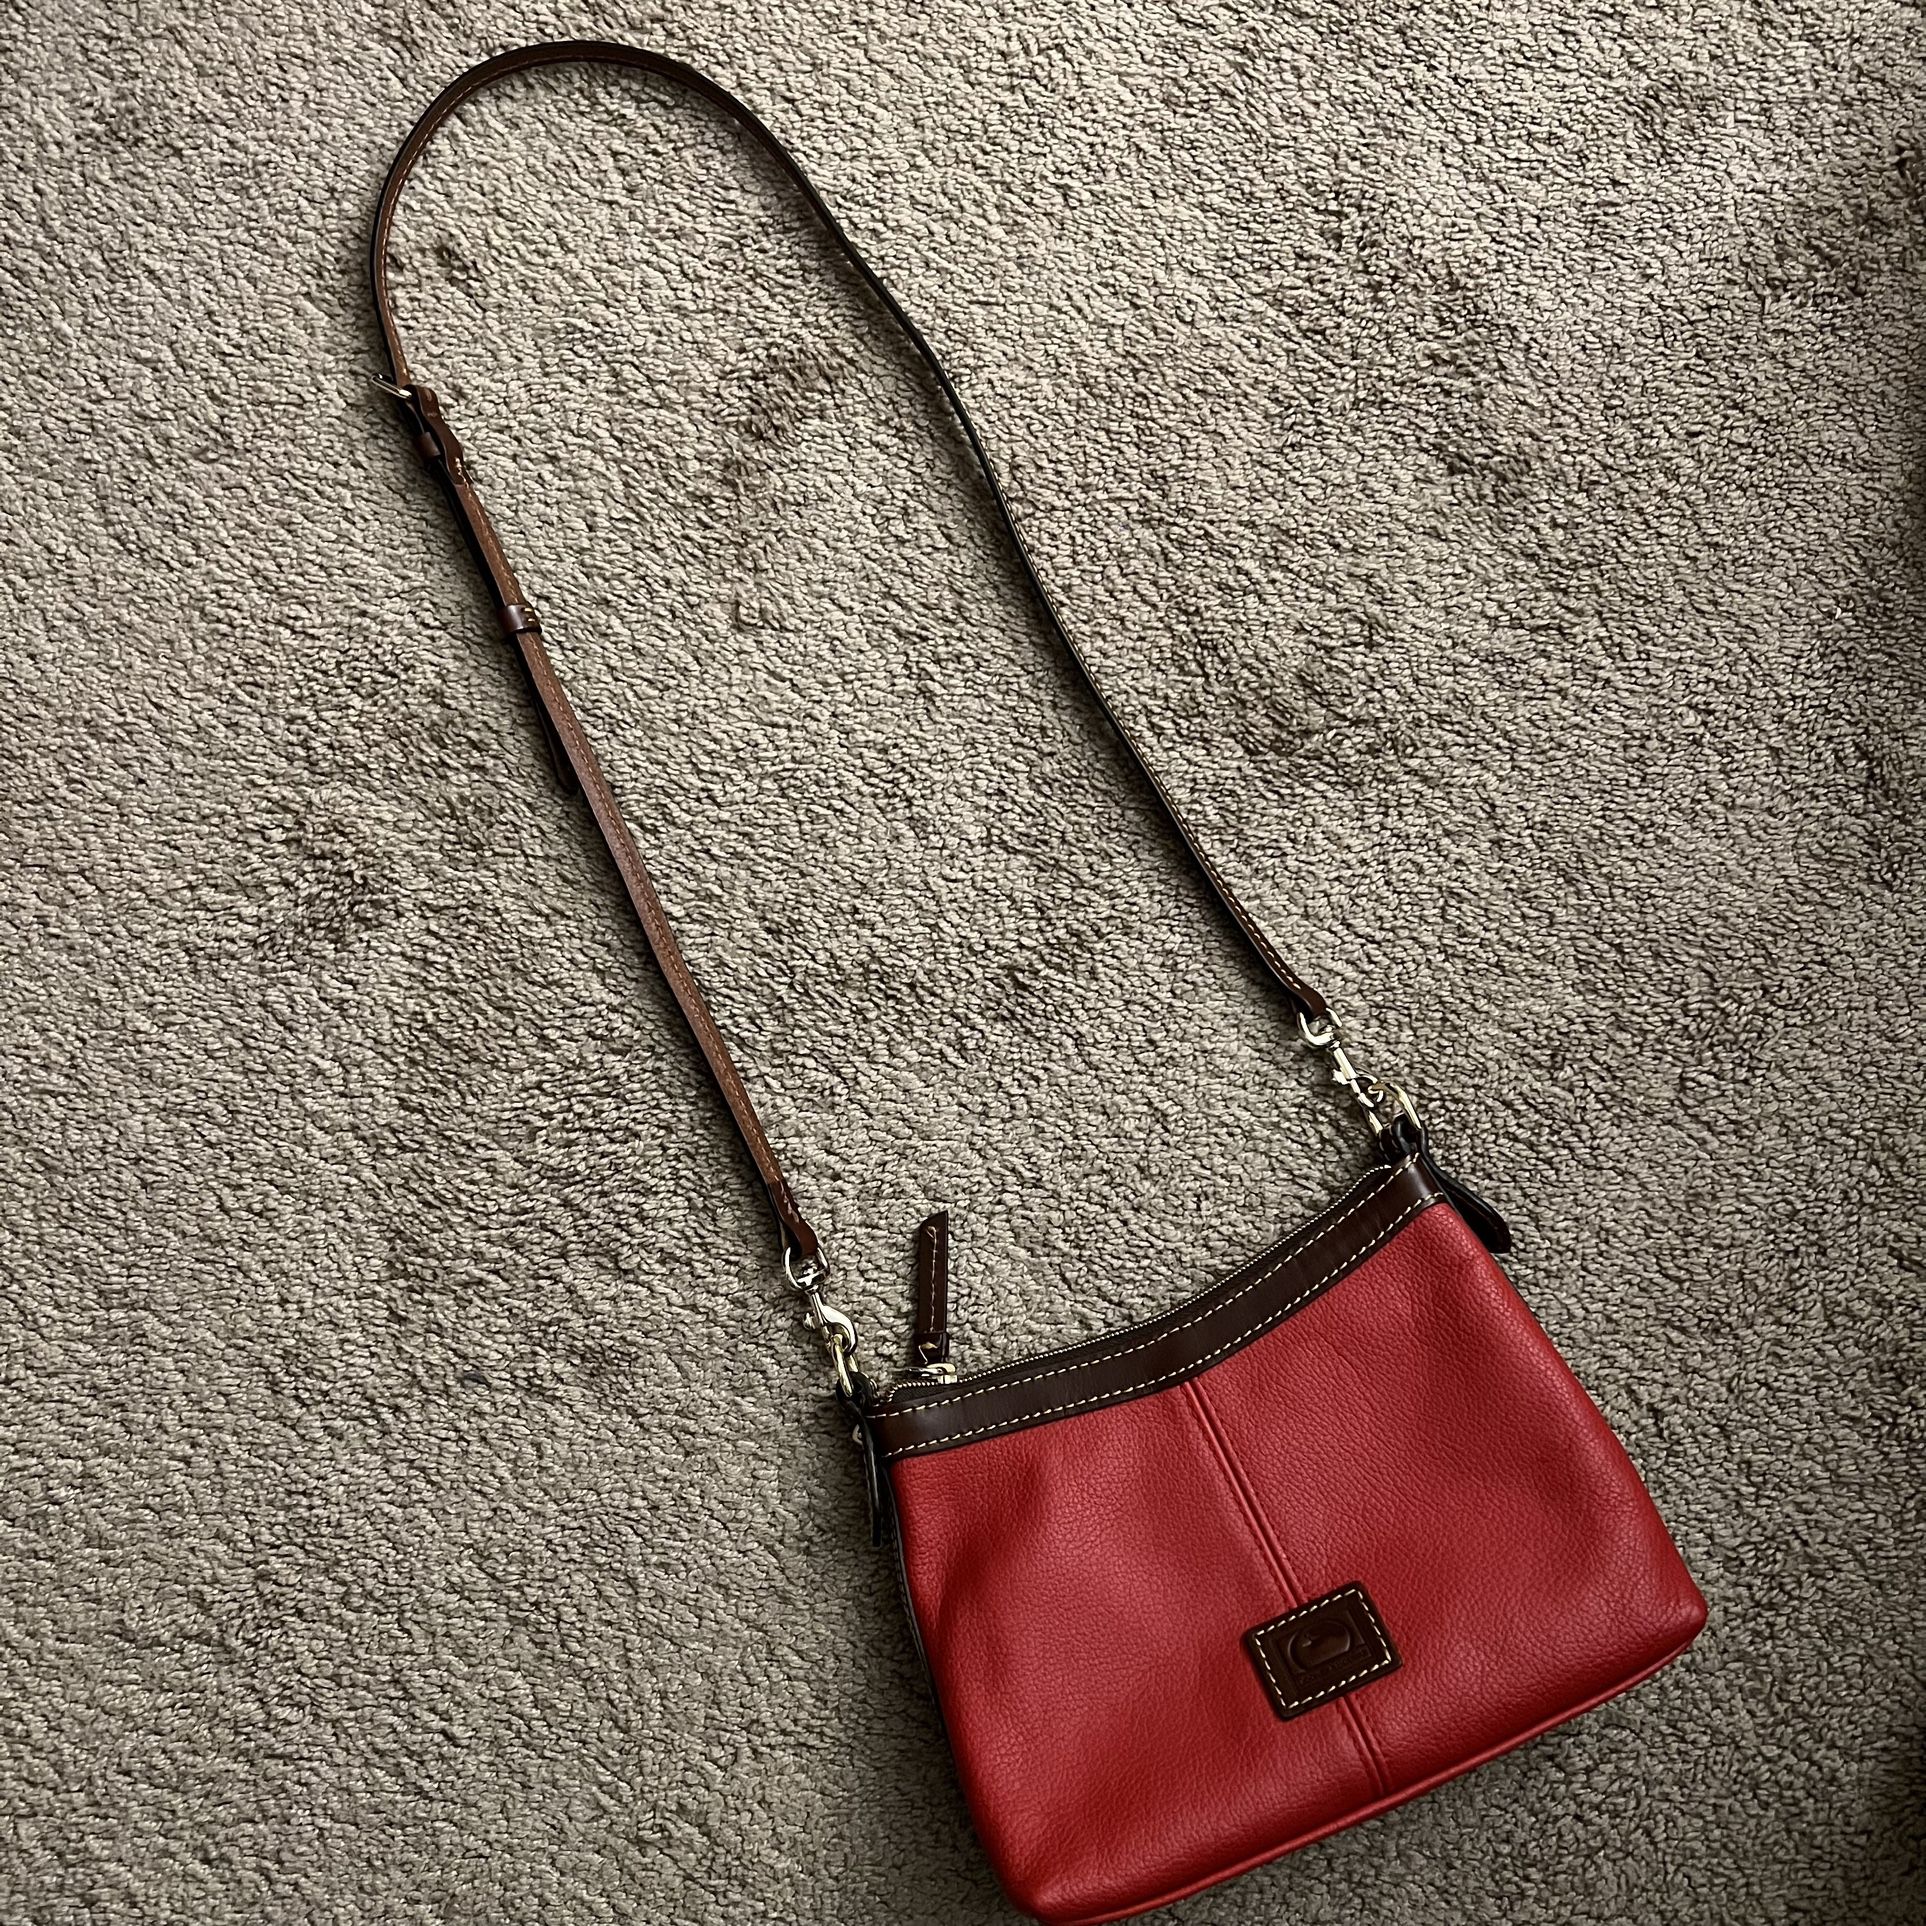 Dooney & Bourke classic red and brown leather crossbody bag